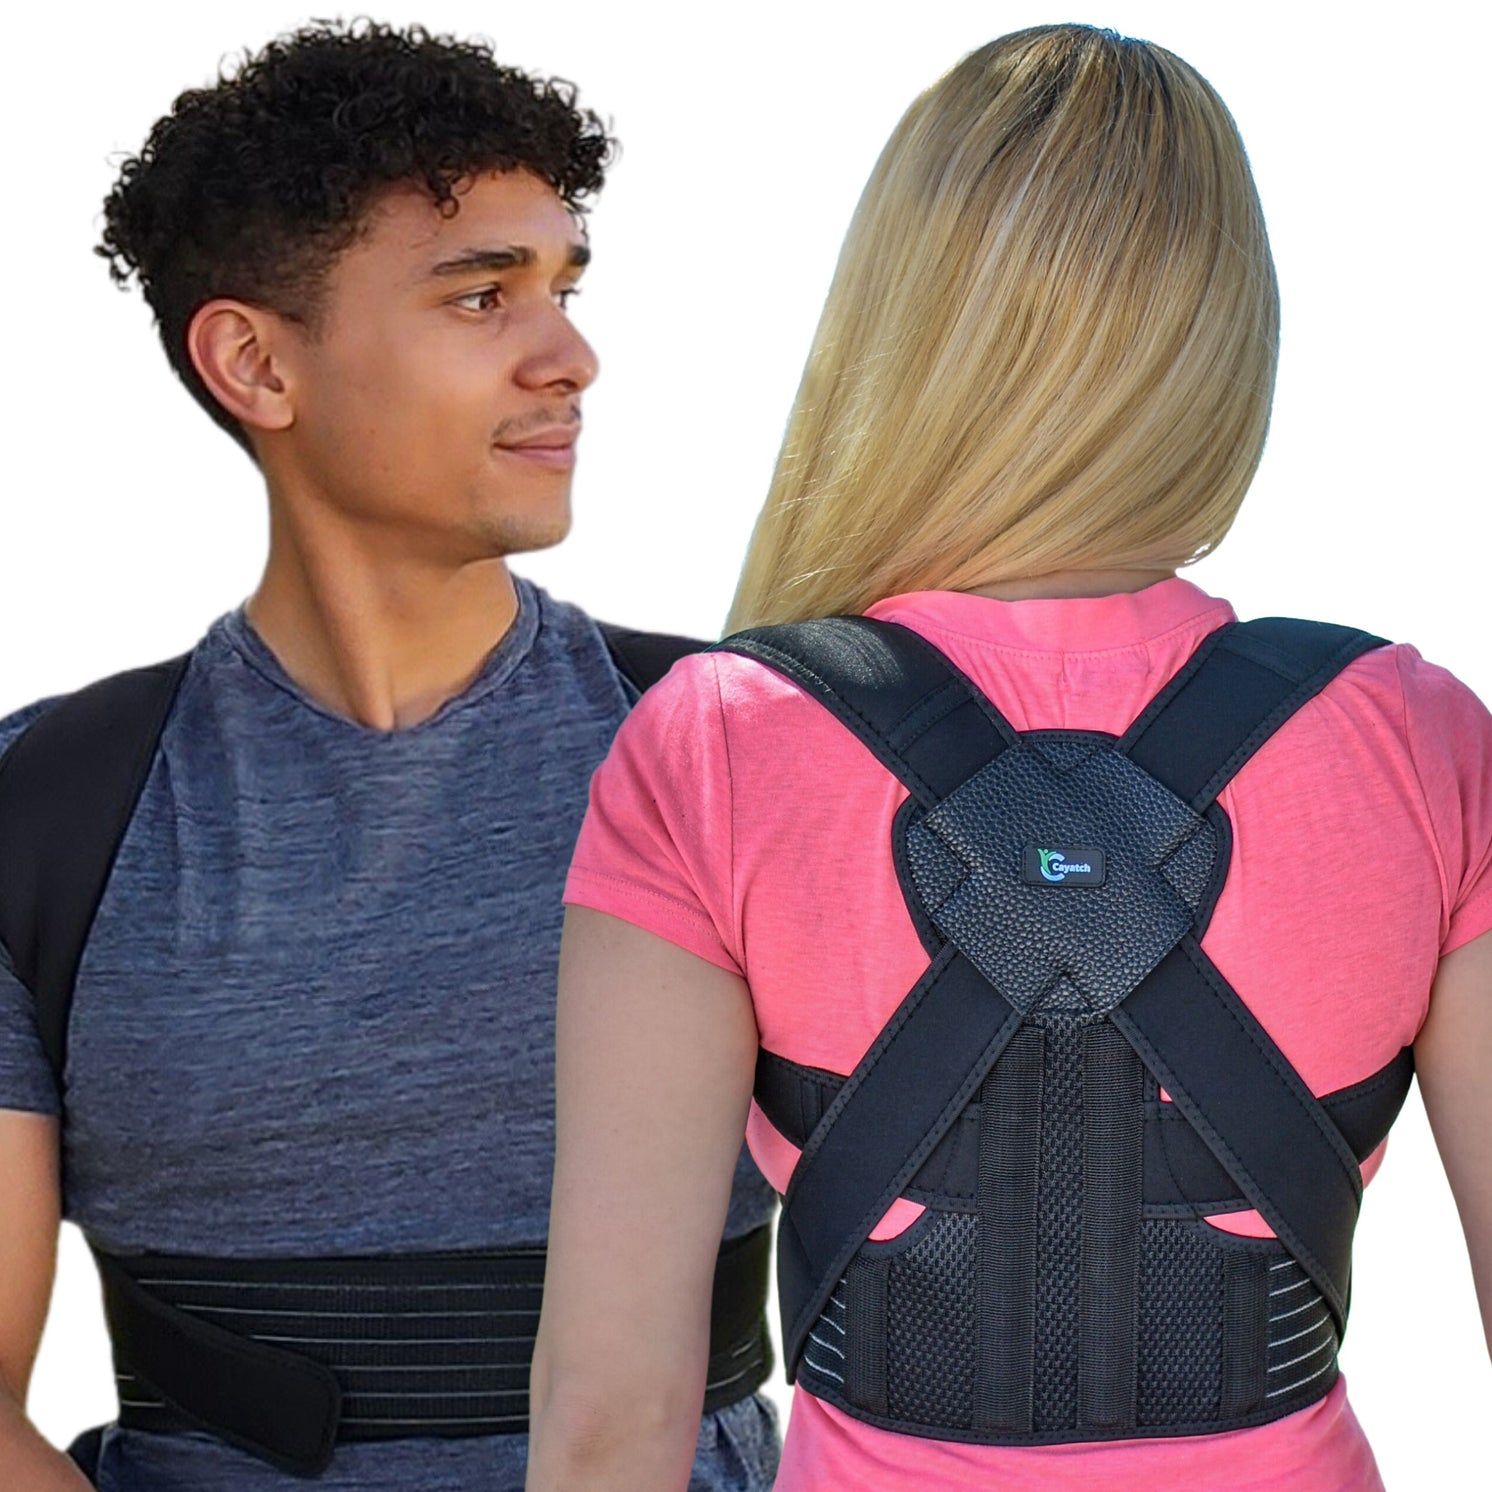  ComfyMed® Posture Corrector Clavicle Support Brace CM-PB16  Medical Device to Improve Bad Posture, Thoracic Kyphosis, Shoulder  Alignment, Upper Back Pain Relief for Men and Women (REG 29 to 40 Chest) 